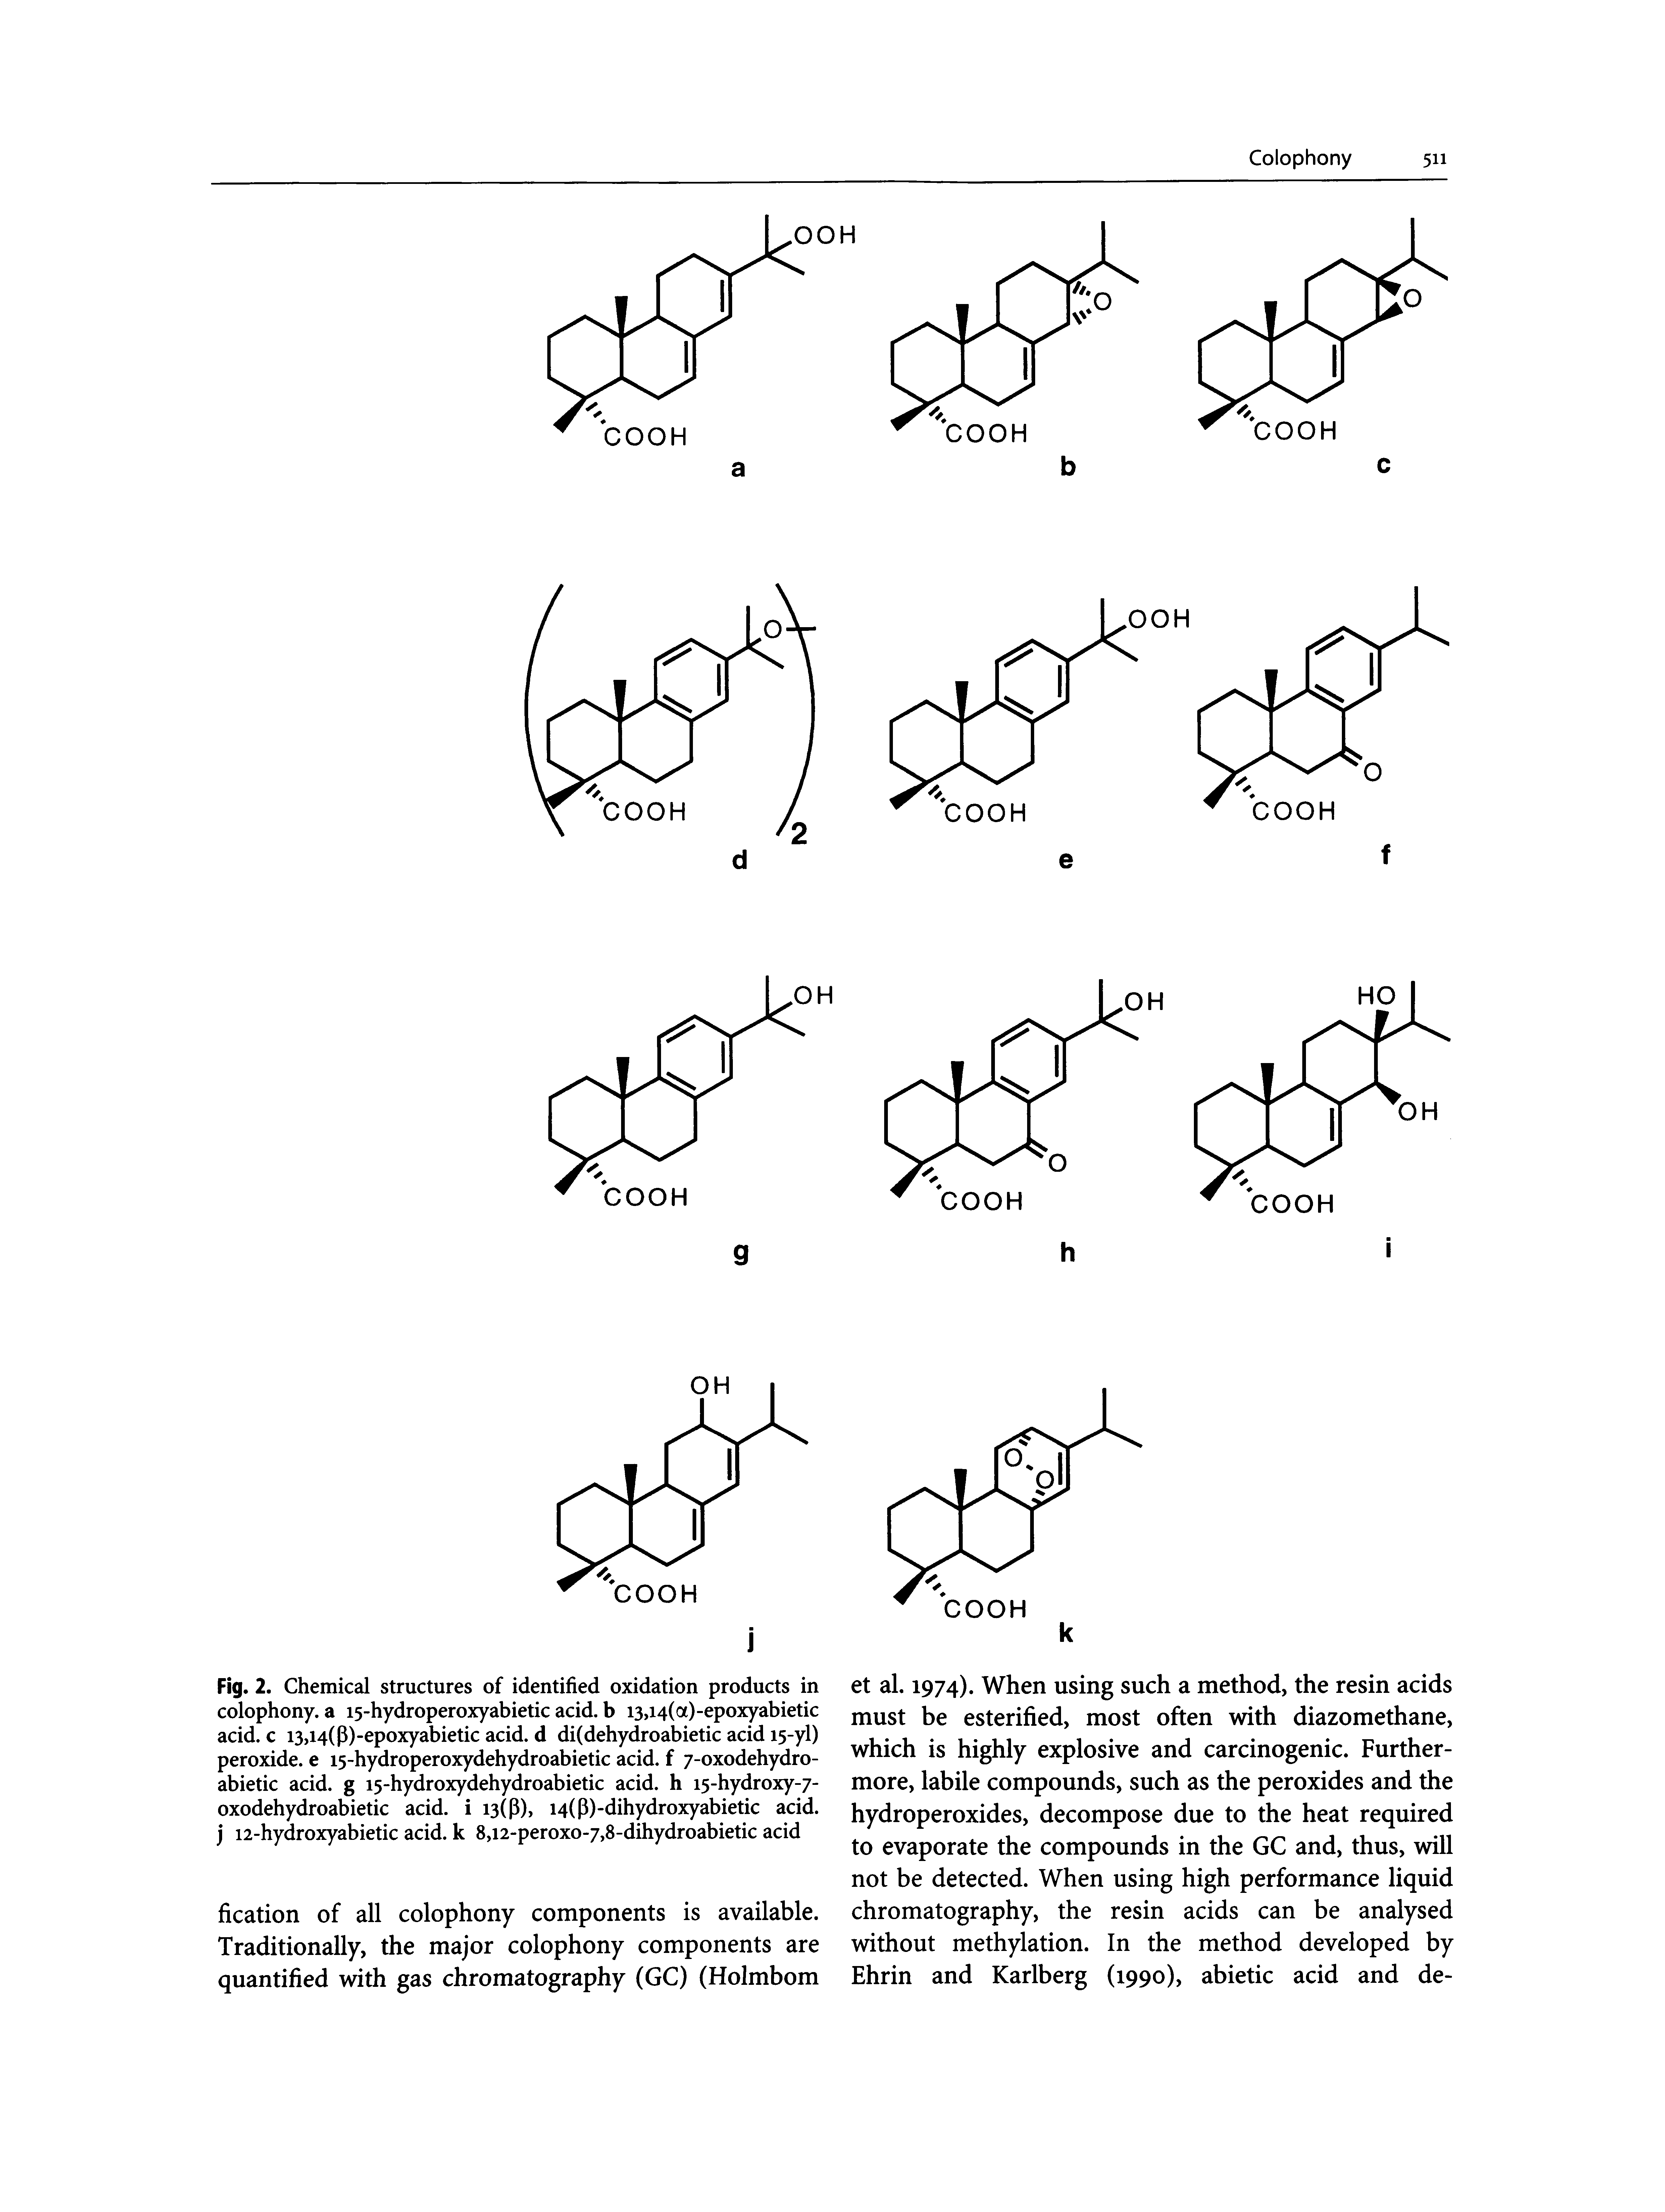 Fig. 2. Chemical structures of identified oxidation products in colophony, a 15-hydroperoxyabietic acid, b i3,i4(a)-epoxyabietic acid, c i3,i4(p)-epoxyabietic acid, d di(dehydroabietic acid 15-yl) peroxide, e 15-hydroperoxydehydroabietic acid, f 7-oxodehydro-abietic acid, g 15-hydroxydehydroabietic acid, h 15-hydroxy-/-oxodehydroabietic acid, i i3(p), i4(p)-dihydroxyabietic acid, j 12-hydroxyabietic acid, k 8,i2-peroxo-7,8-dihydroabietic acid...